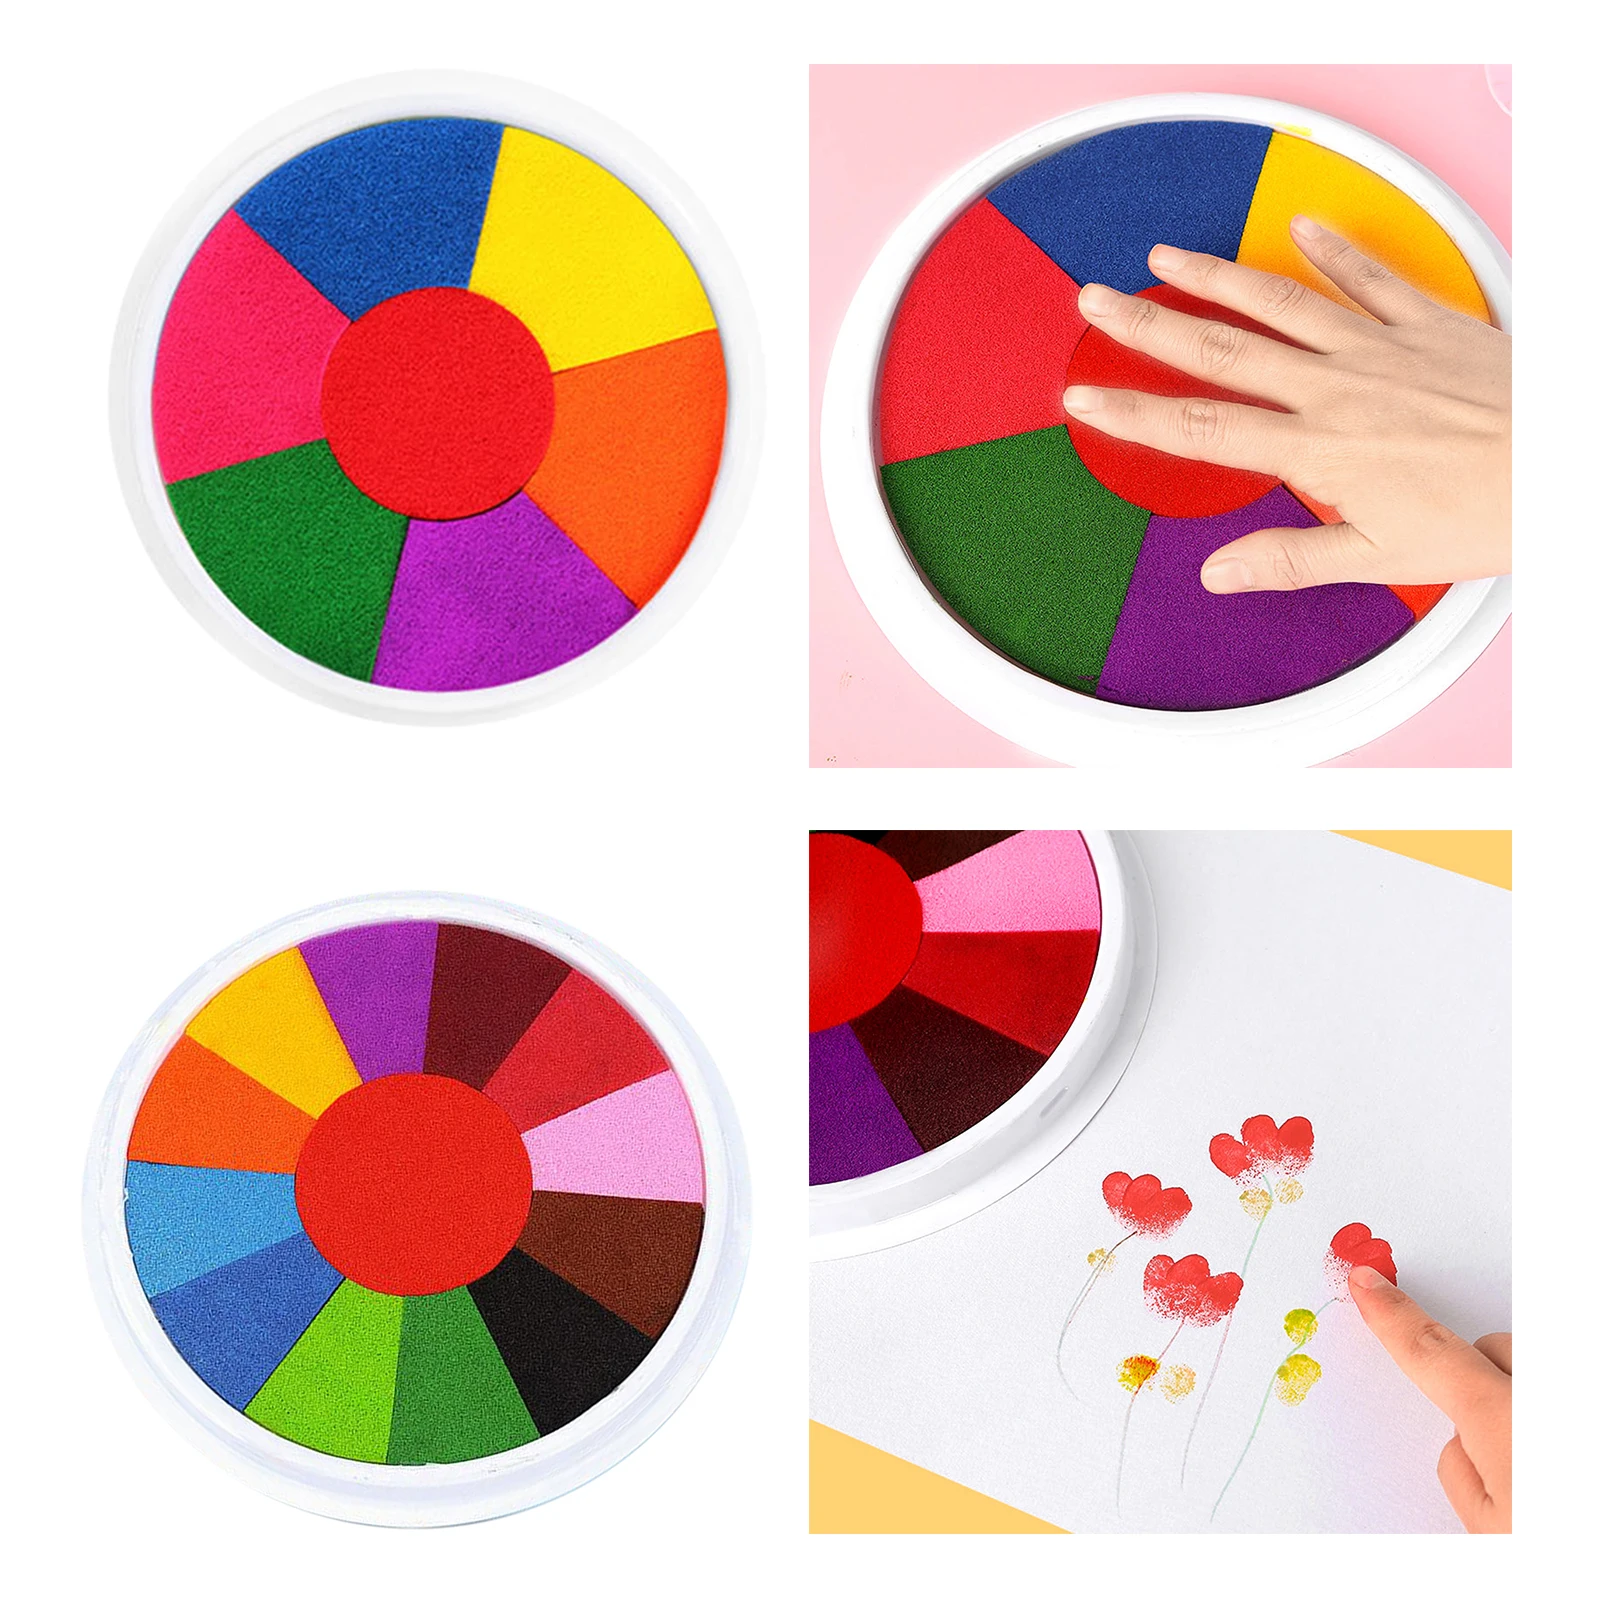 Colorful Rainbow Washable Craft Ink Pads Stamp Non Toxic Finger Painting For Rubber Stamps Kids Boys Girls Diy Art Painting Tool Drawing Toys Aliexpress